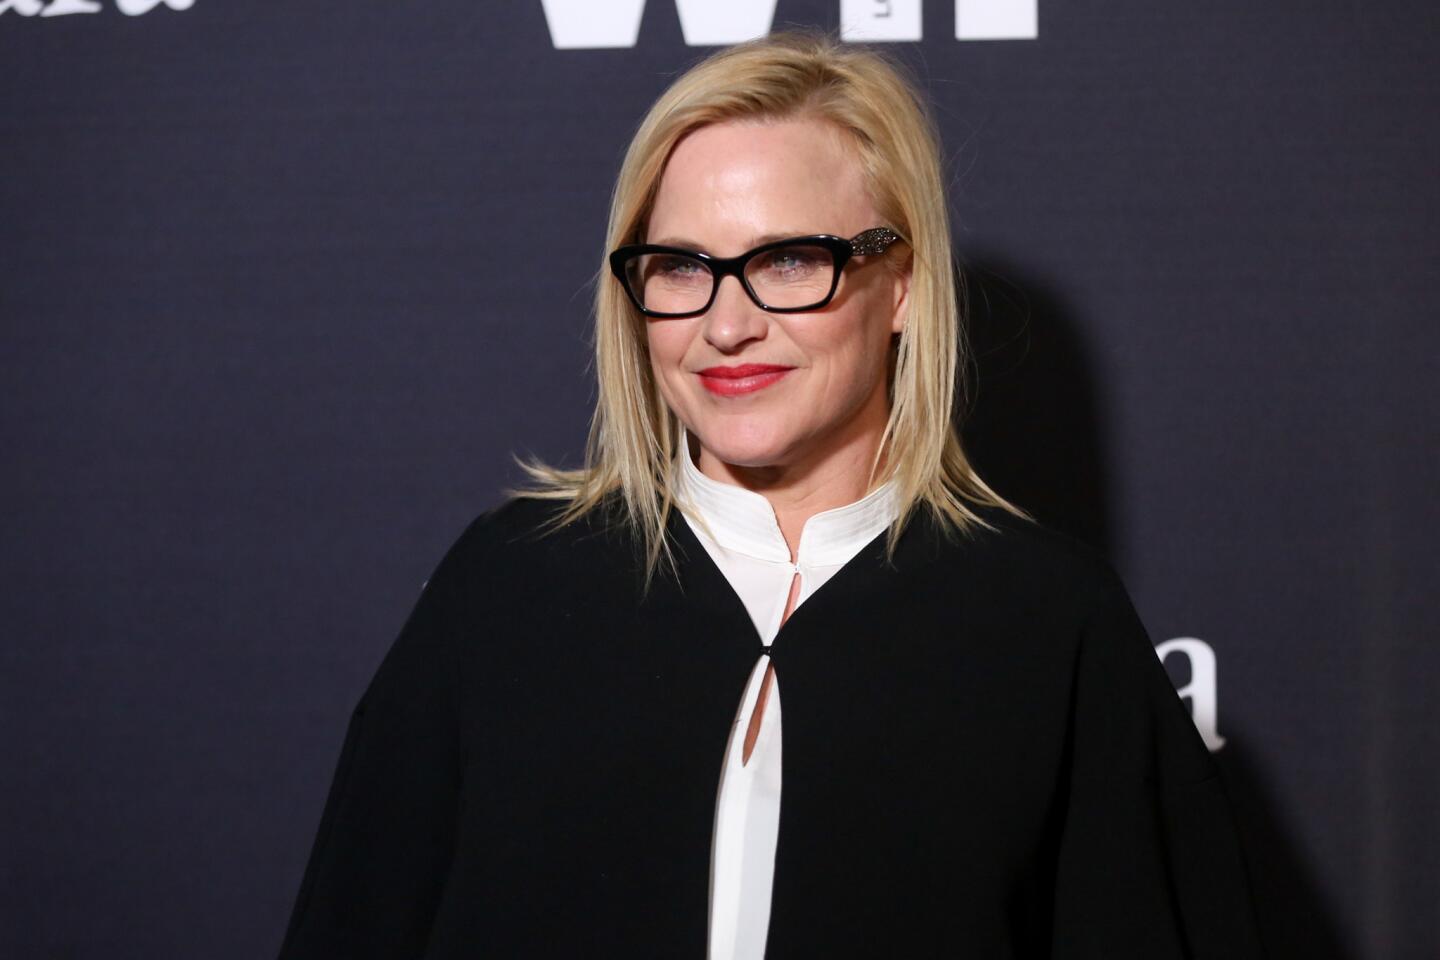 Patricia Arquette is among the guests at the ninth annual Women In Film pre-Oscar cocktail party in West Hollywood.